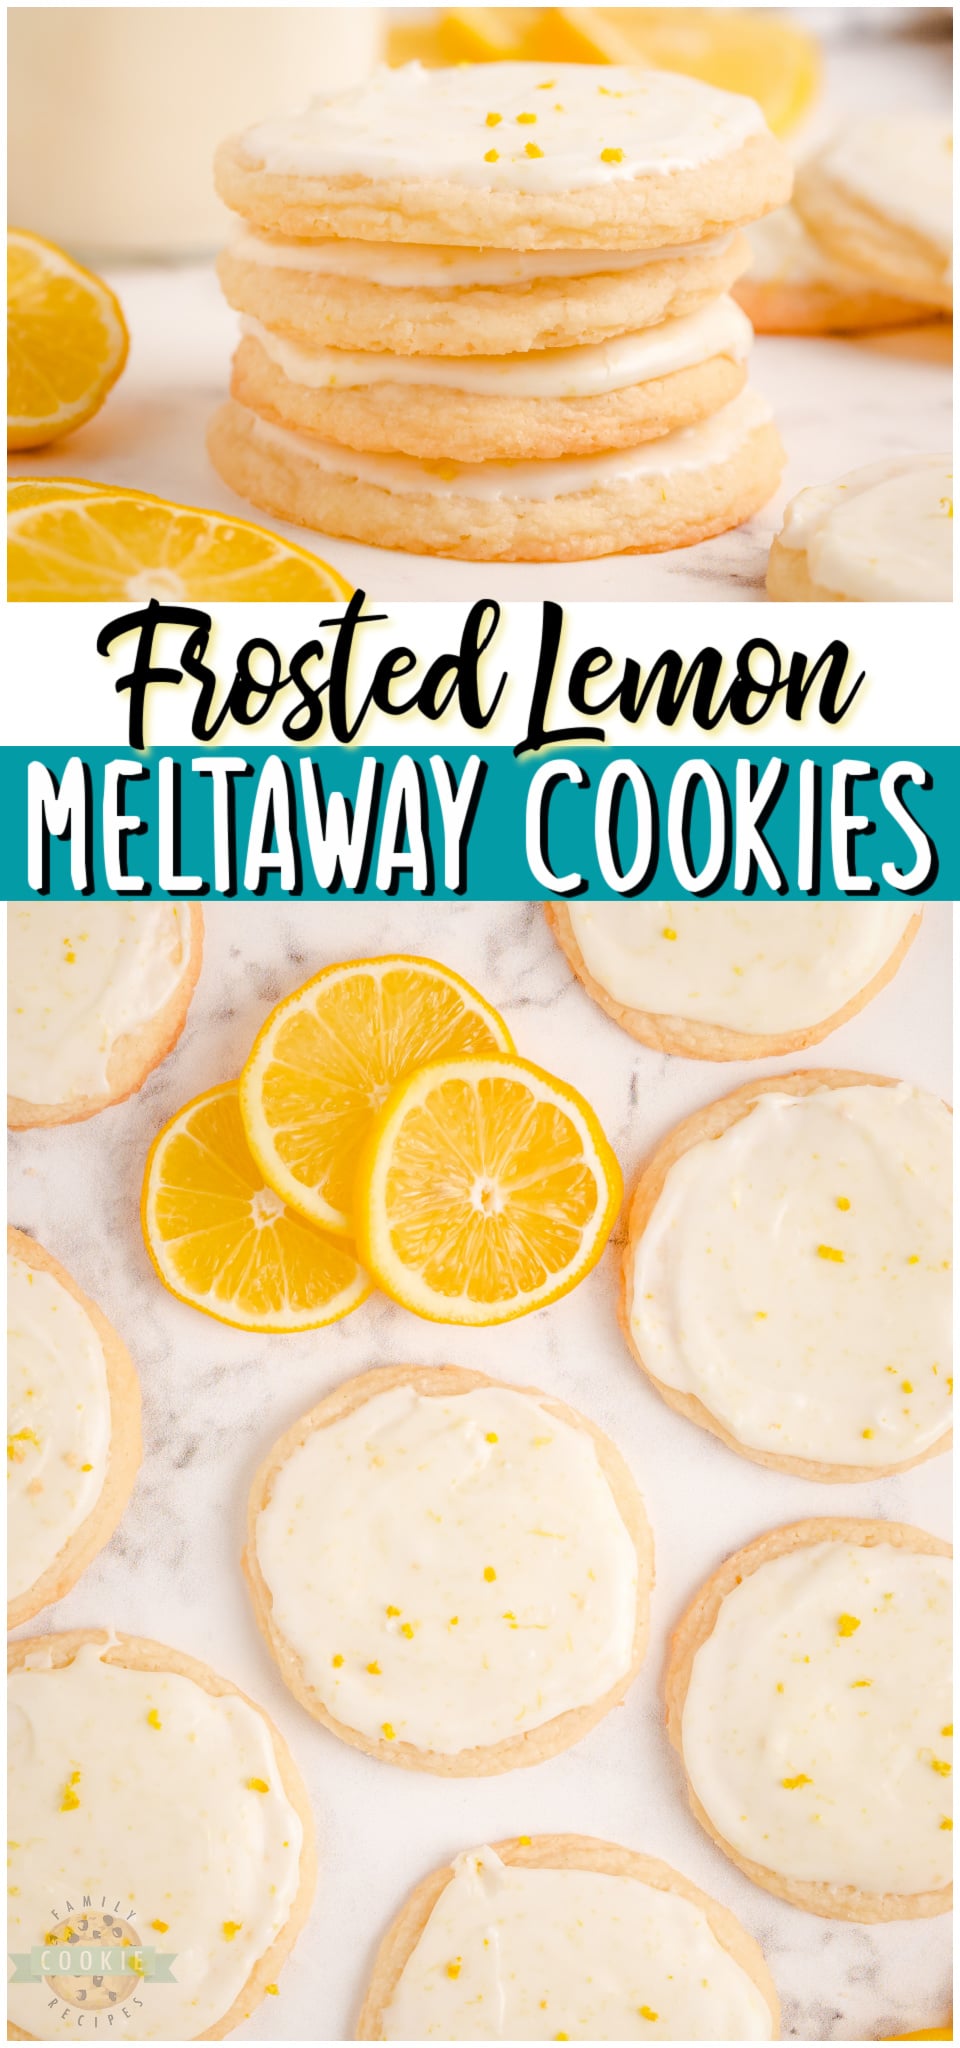 Lemon Meltaways made with simple ingredients like butter, flour, lemon zest & cornstarch. Soft, tender meltaway cookies topped with a lovely fresh lemon glaze!  #lemon #cookies #meltaways #baking #dessert #easyrecipe from FAMILY COOKIE RECIPES via @buttergirls